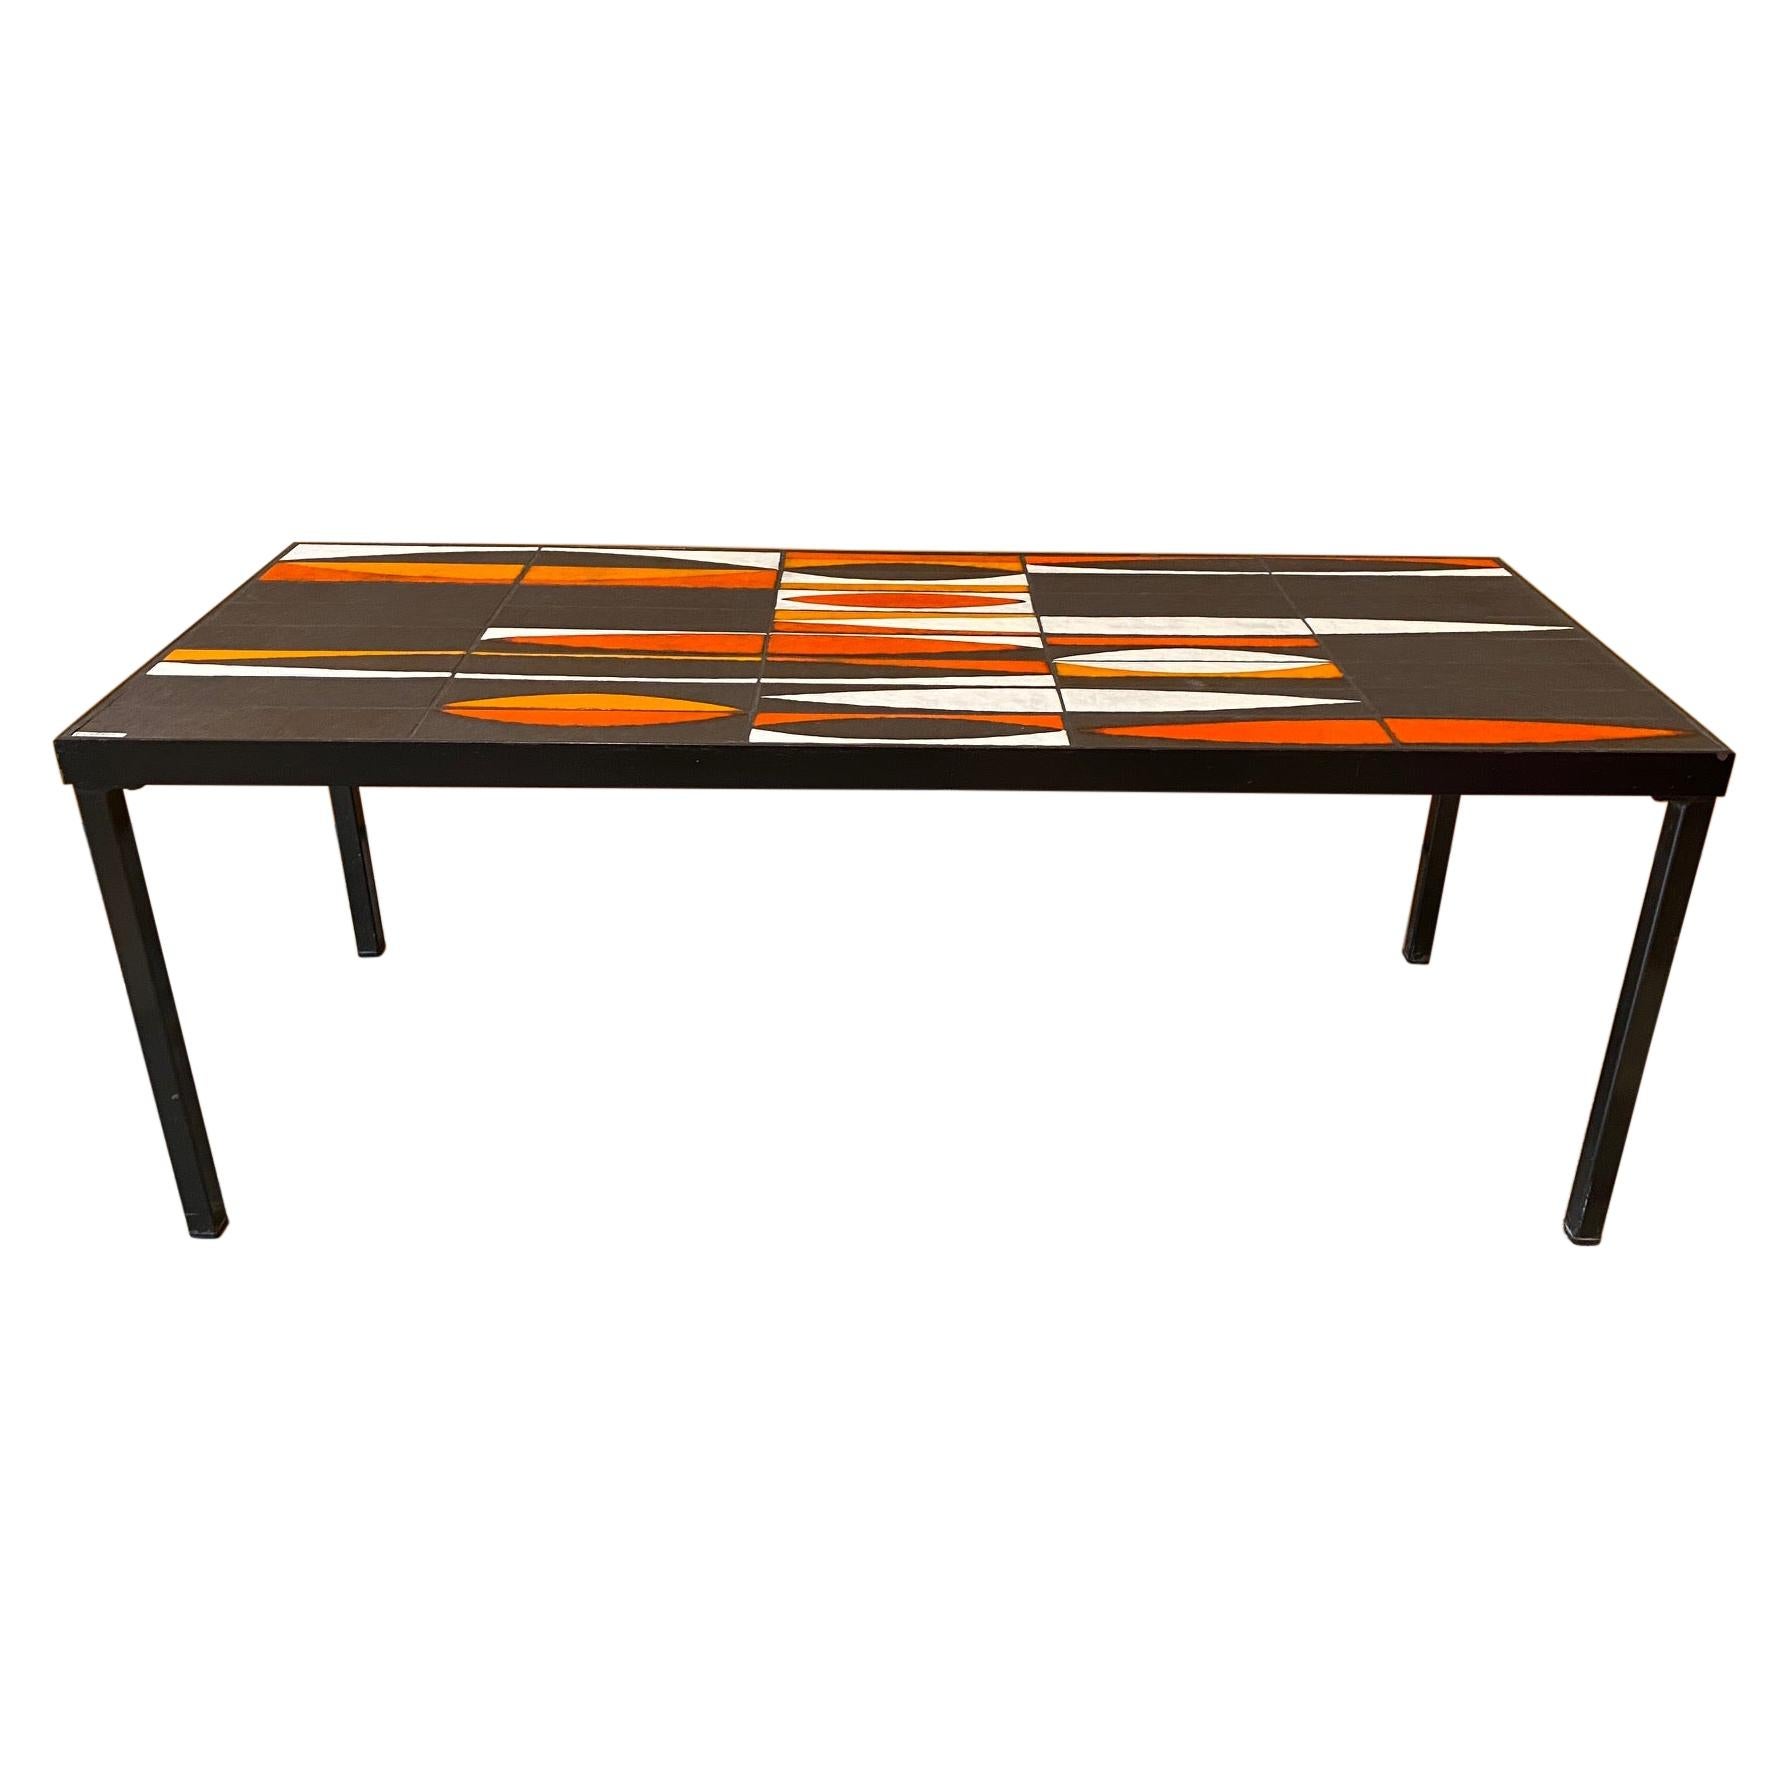 Ceramic Coffee Table "Navettes" by Roger Capron, France, 1960s